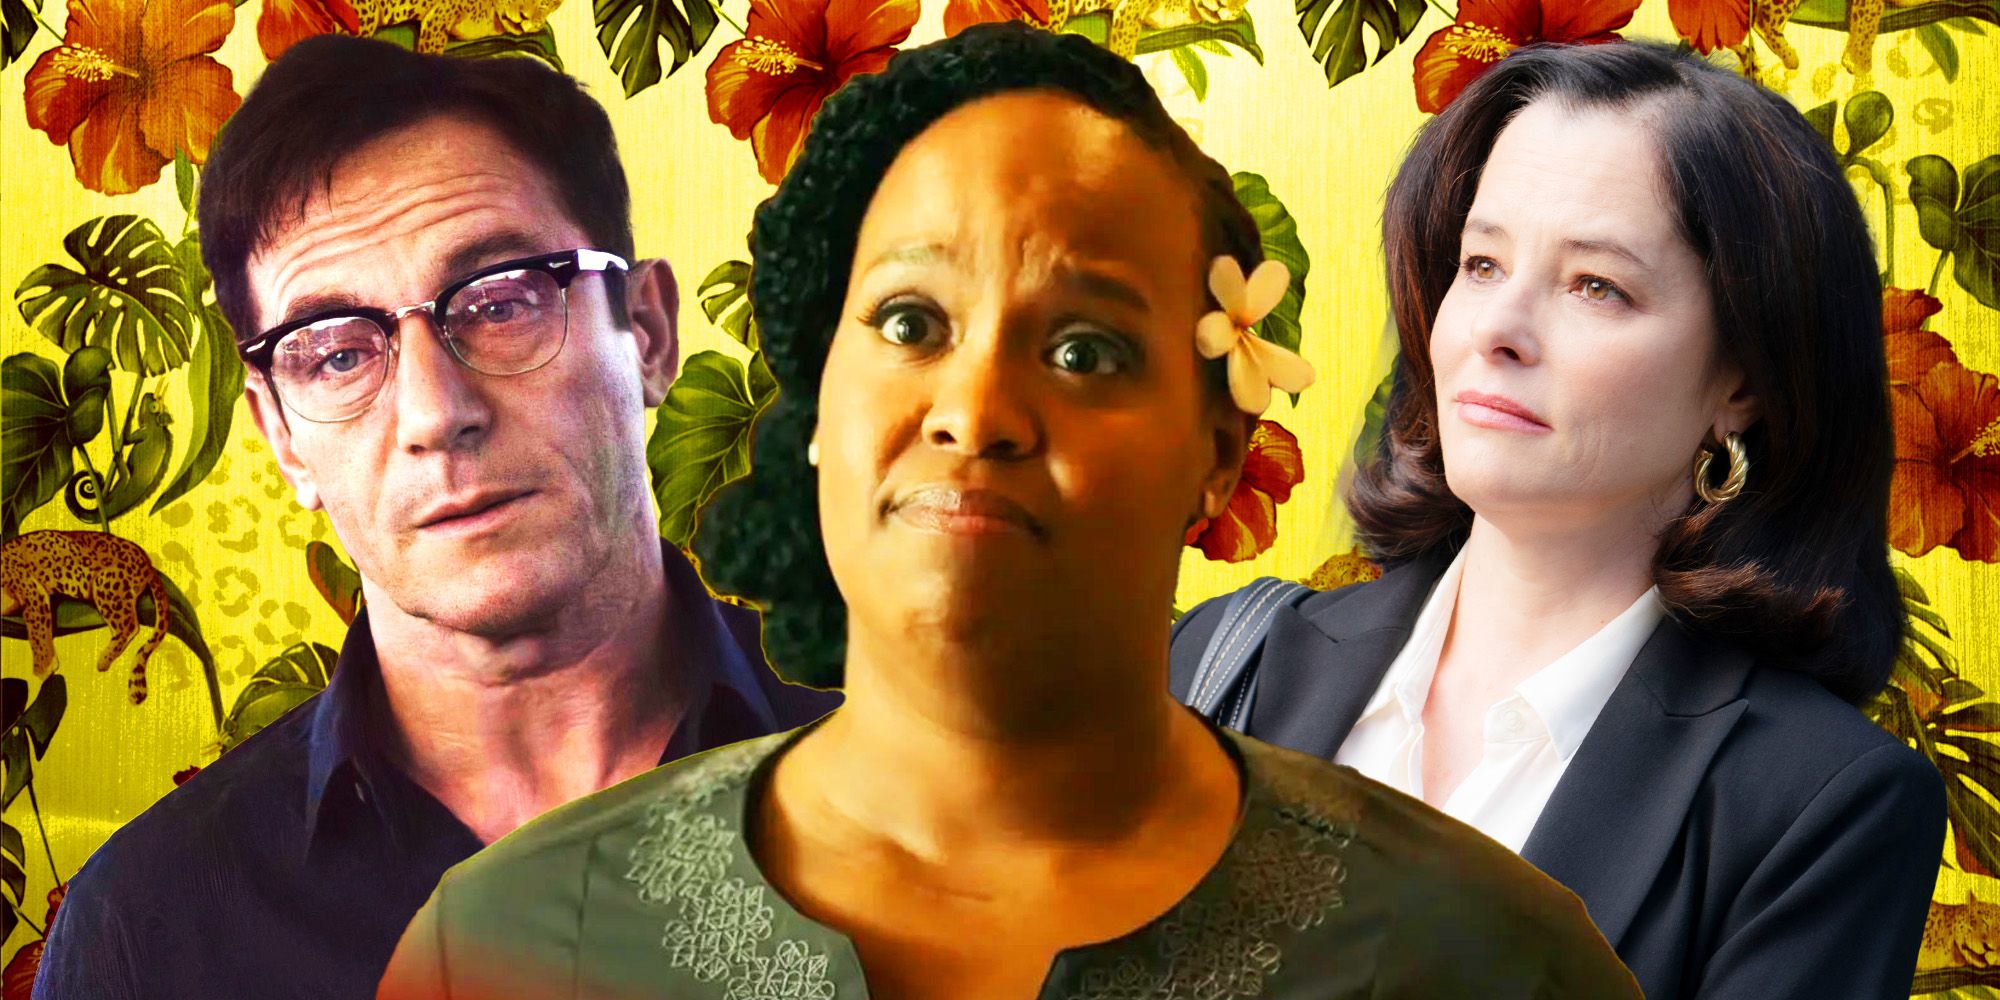 Natasha Rothwell as Belinda in The White Lotus, Jason Isaacs from The OA, and Parker Posey in Beau is Afraid.